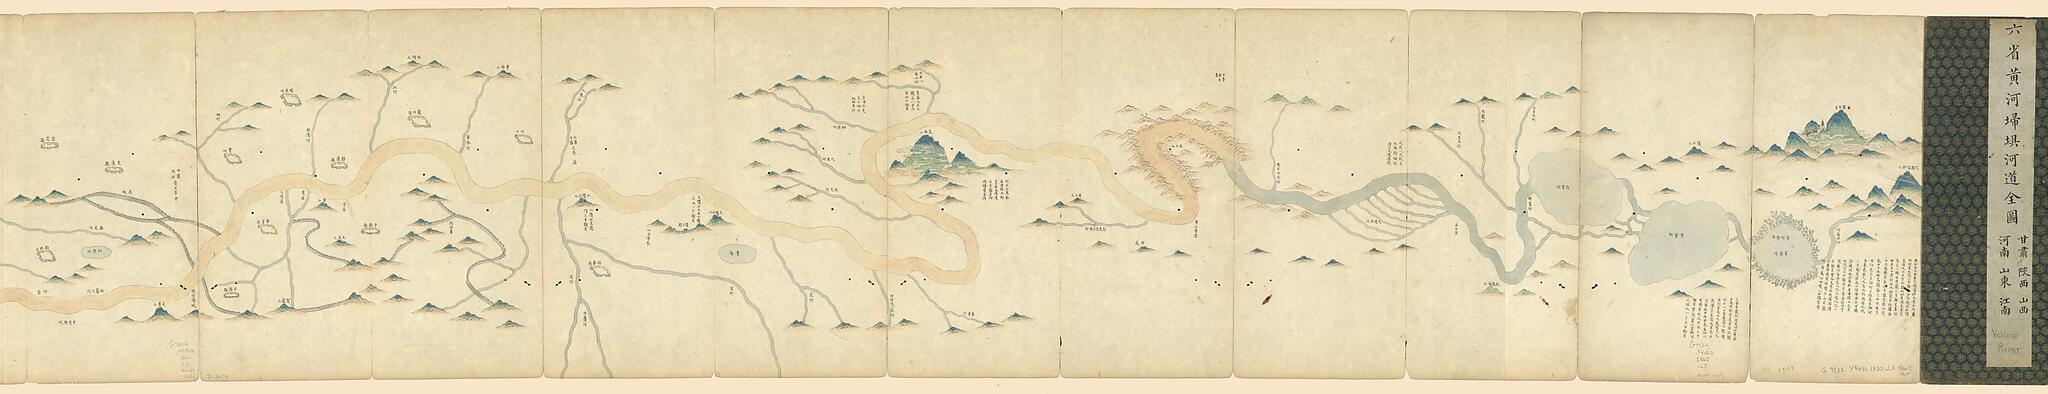 This old map of Liu Sheng Huang He Sao Ba He Dao Quan Tu. (六省黃河埽垻河道全圖, the Yellow River Embankment Map for Six Provinces) from 1824 was created by  in 1824